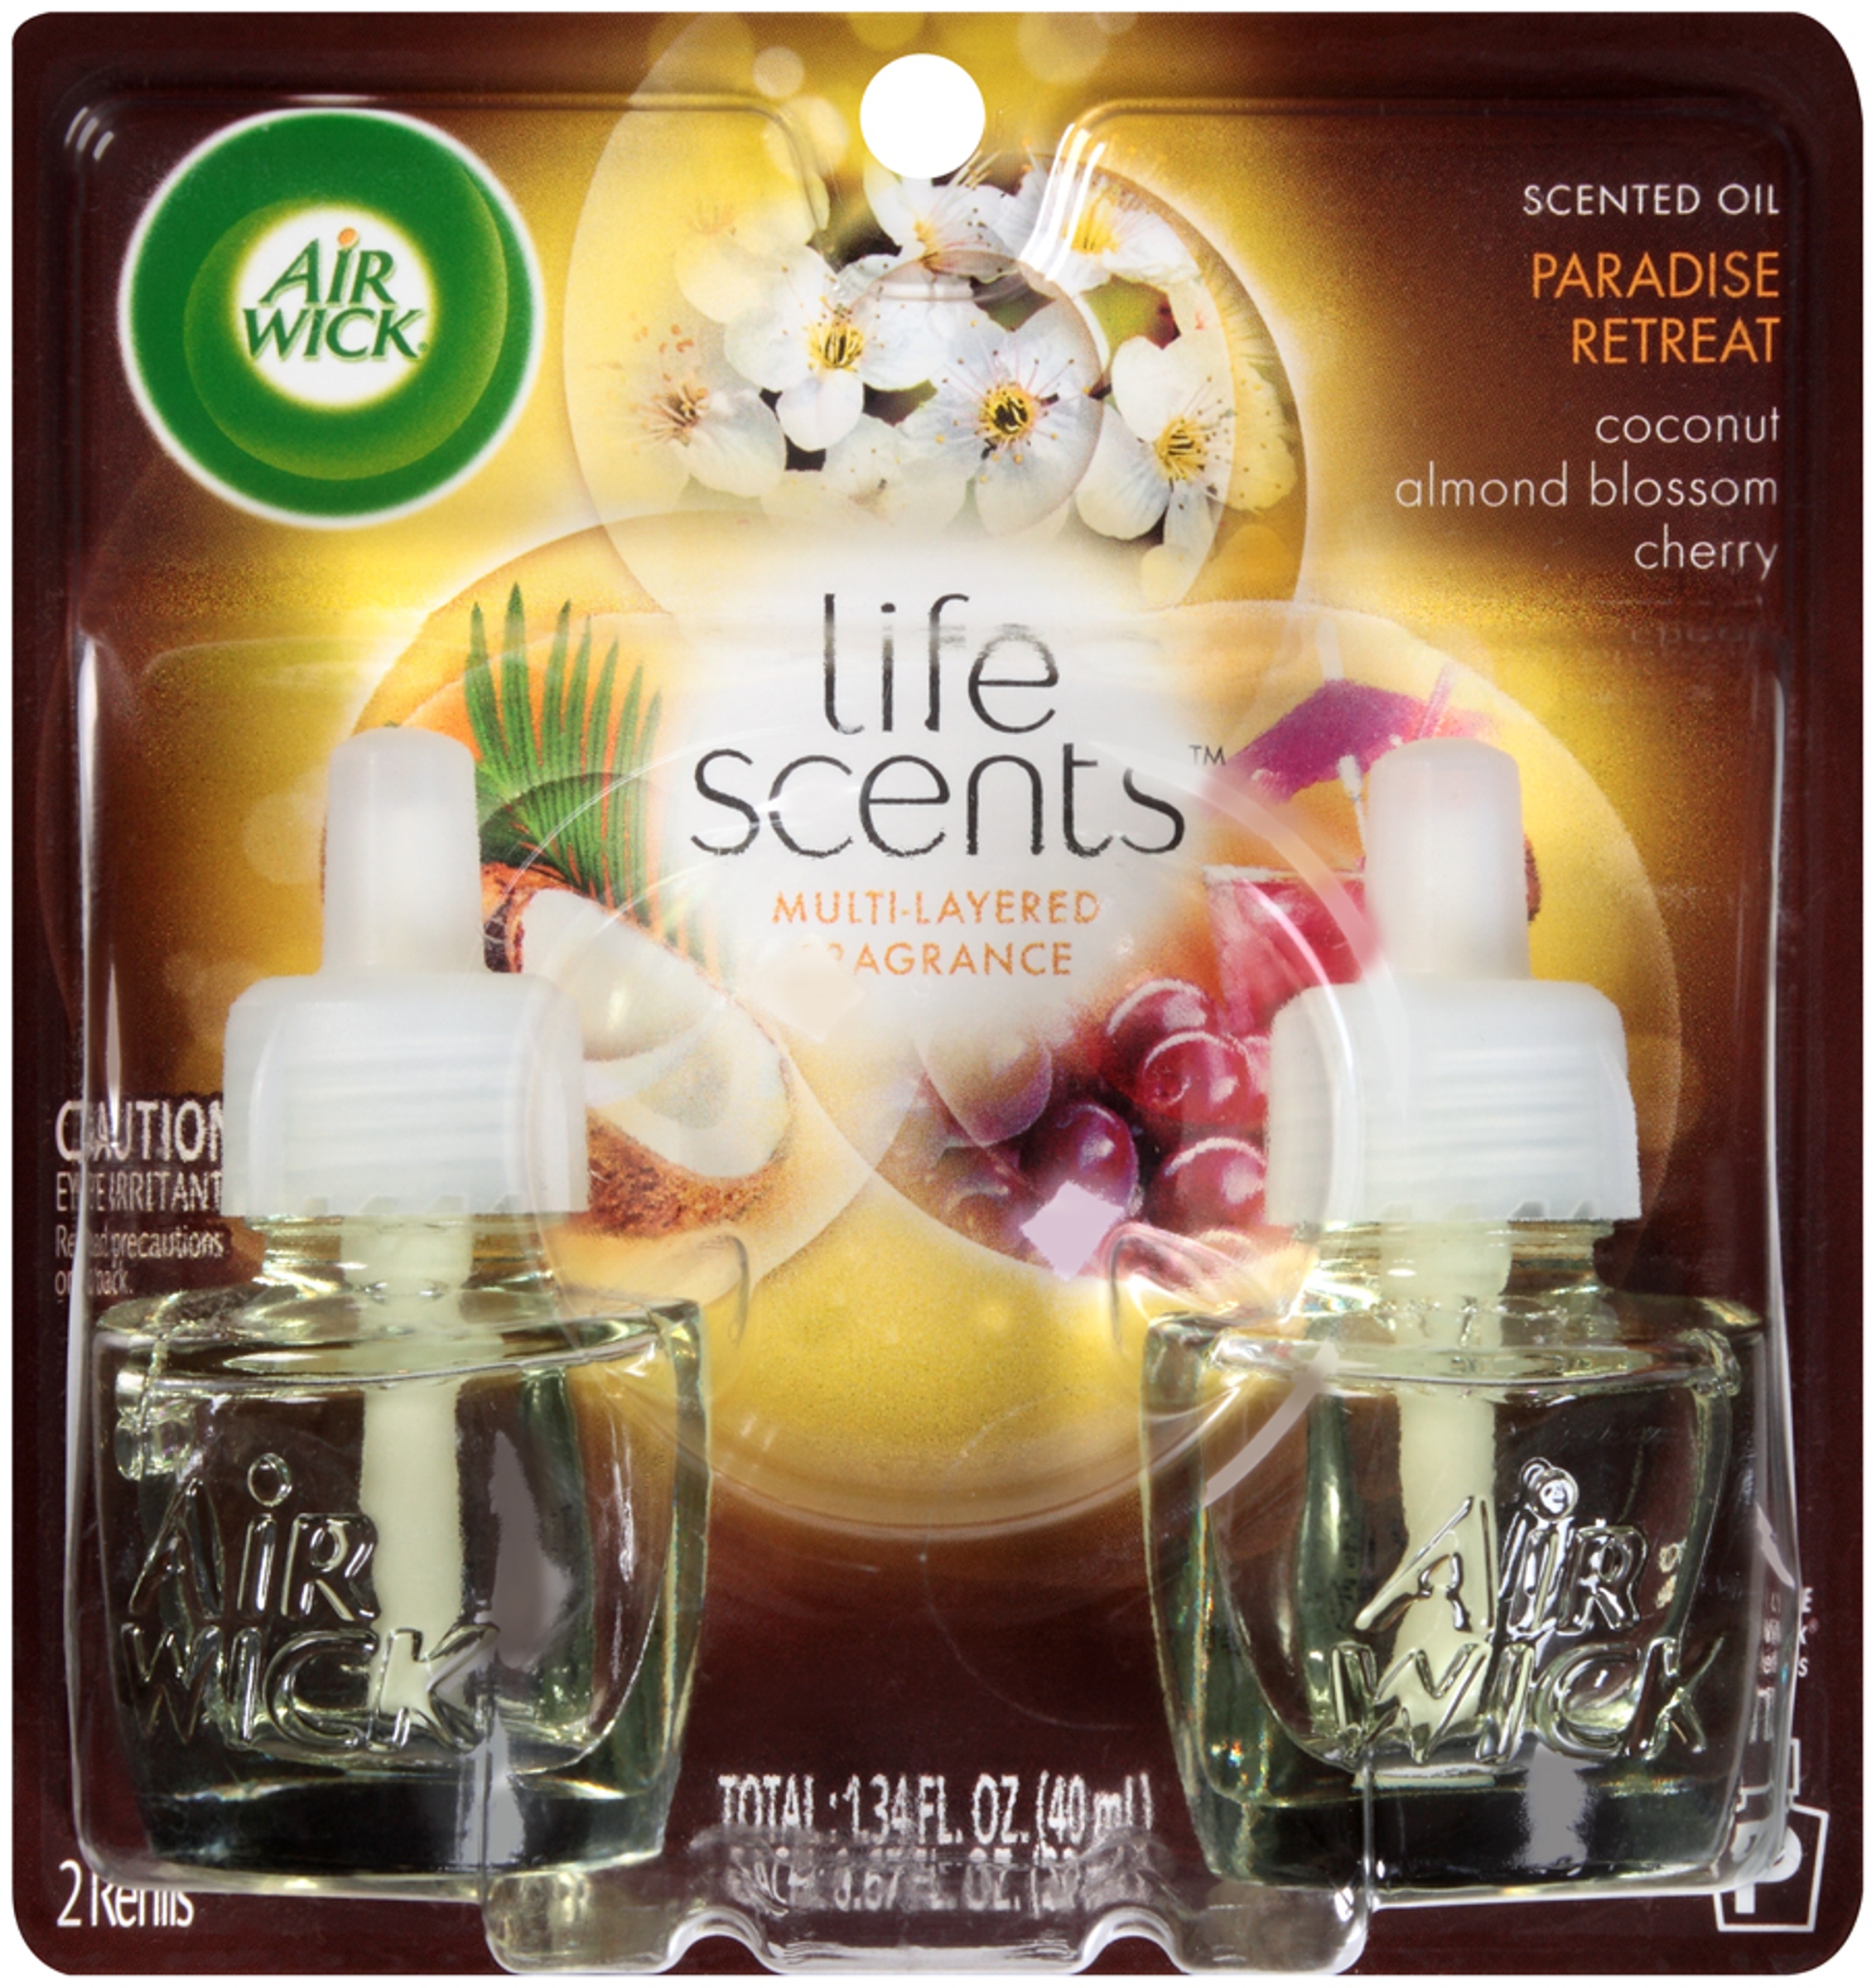 Airwick Life Scents Scented Oil Refills Paradise Retreat, 2 Refills